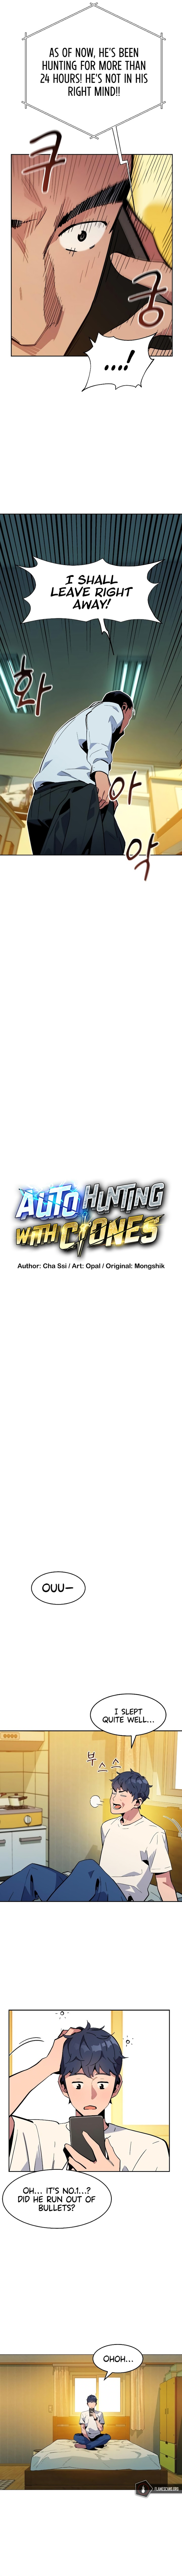 Auto-Hunting With Clones - Chapter 11 Page 3